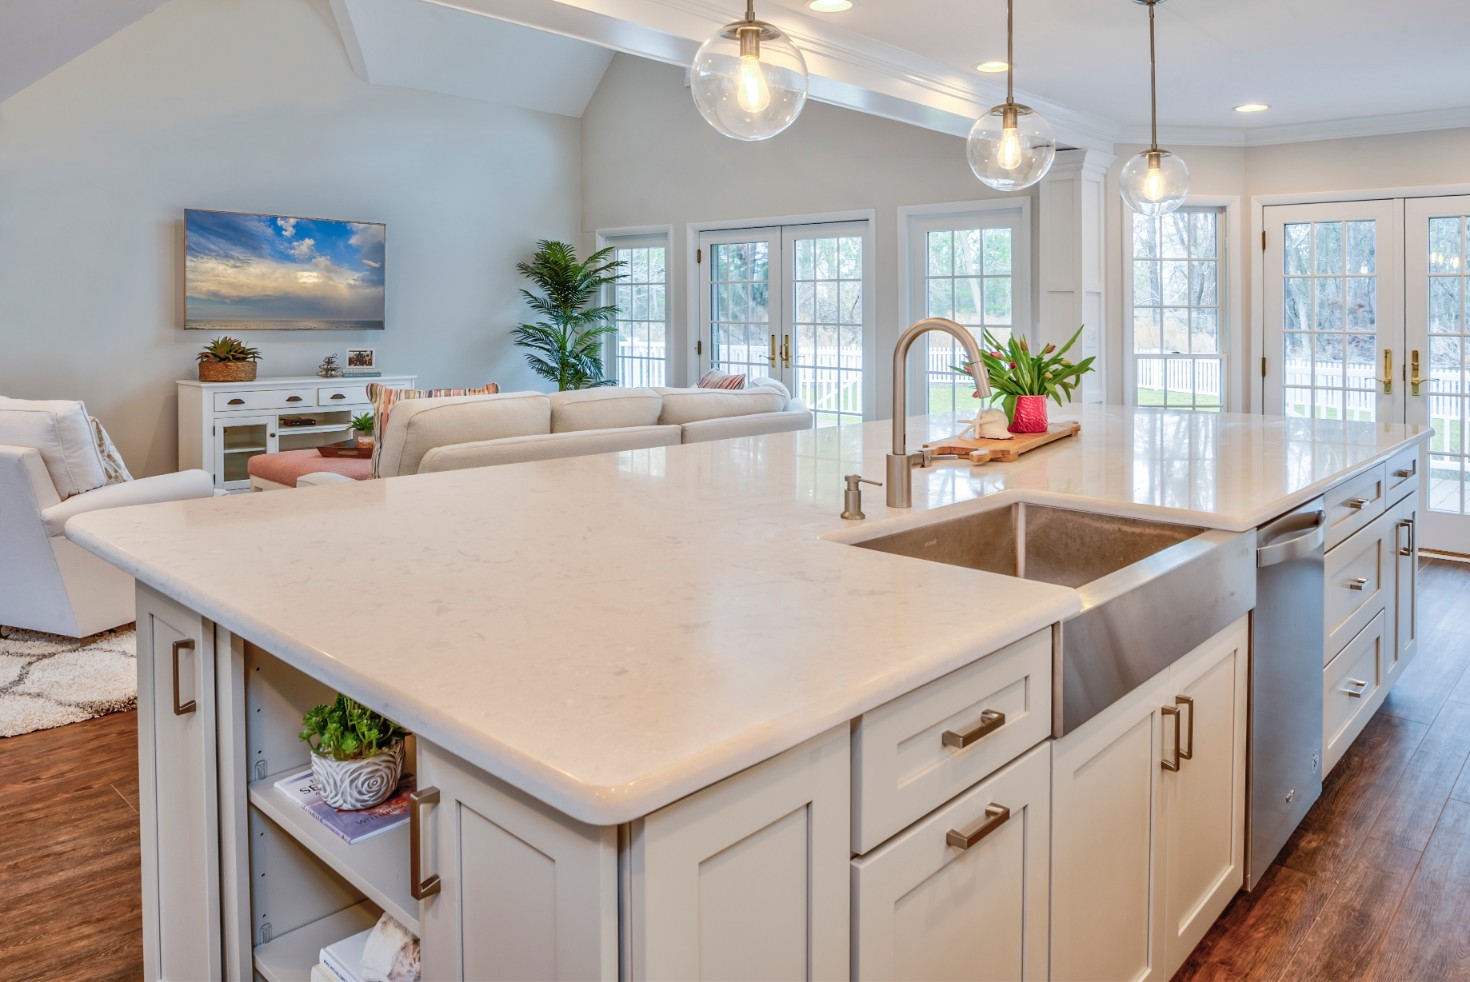 Canal Way Renovation in Bethany Beach DE - Center Island with White Shaker Cabinets and White Countertop